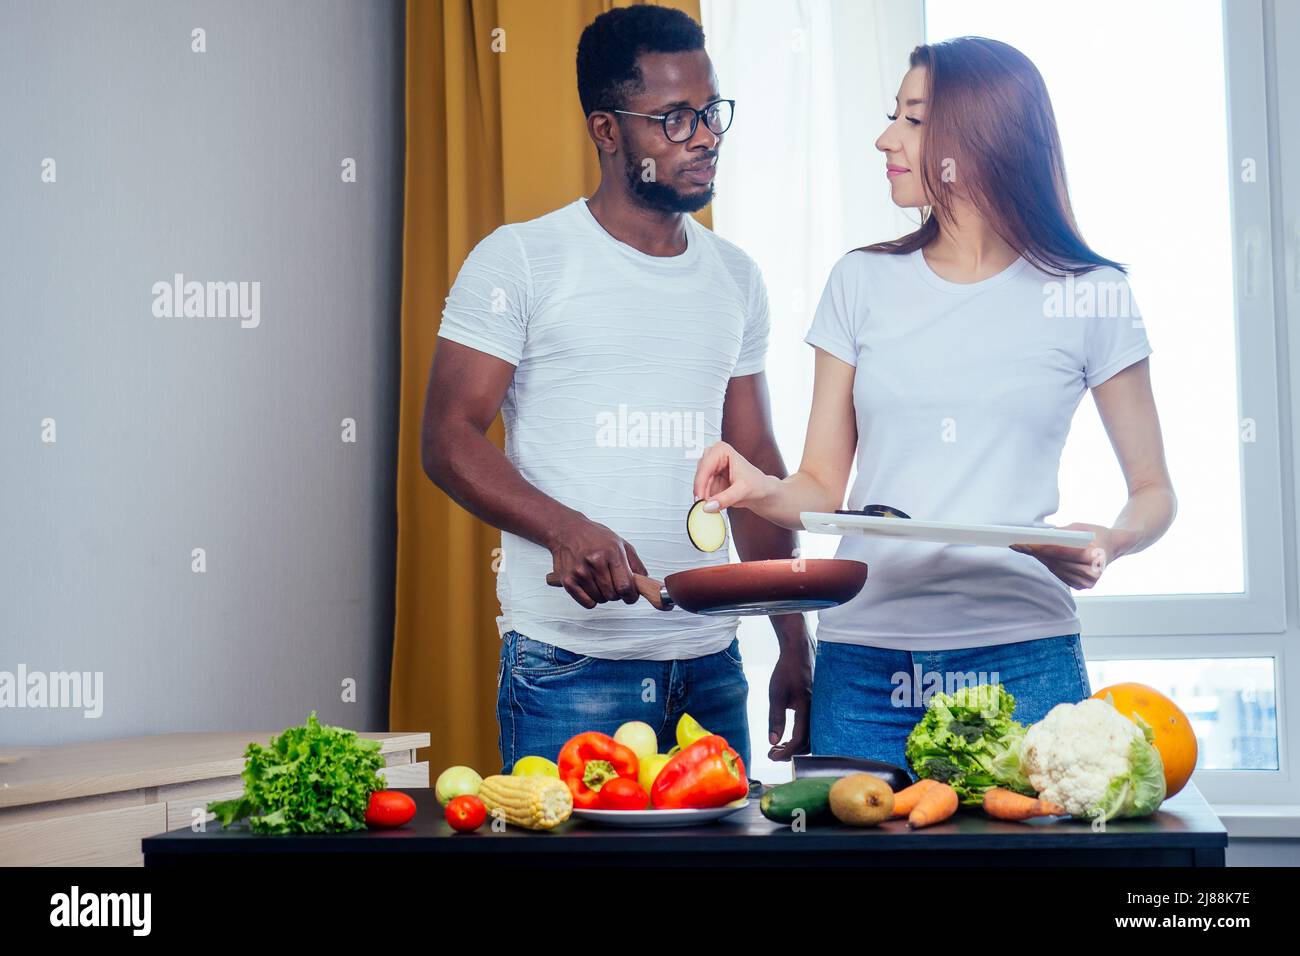 Korean woman wearimg white cotton t-shirt with her african american boyfriend cooking in fry pan bresksast Stock Photo